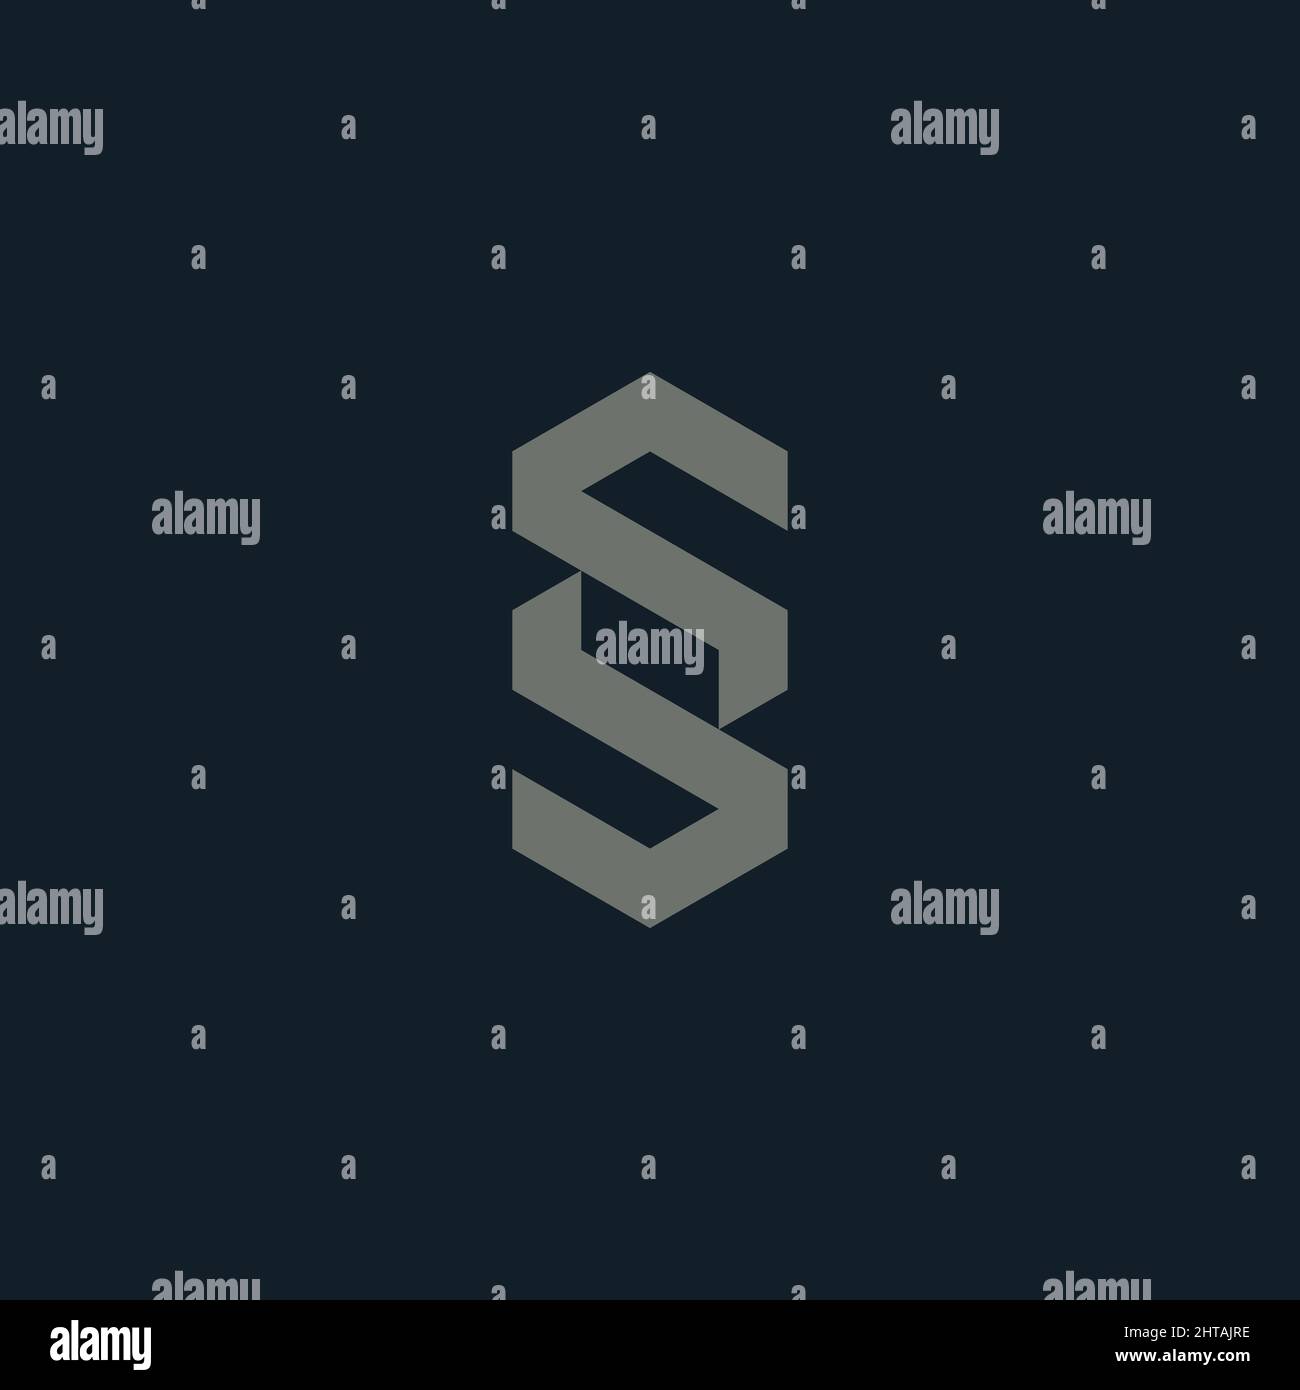 Ss brand logo Stock Vector Images - Alamy